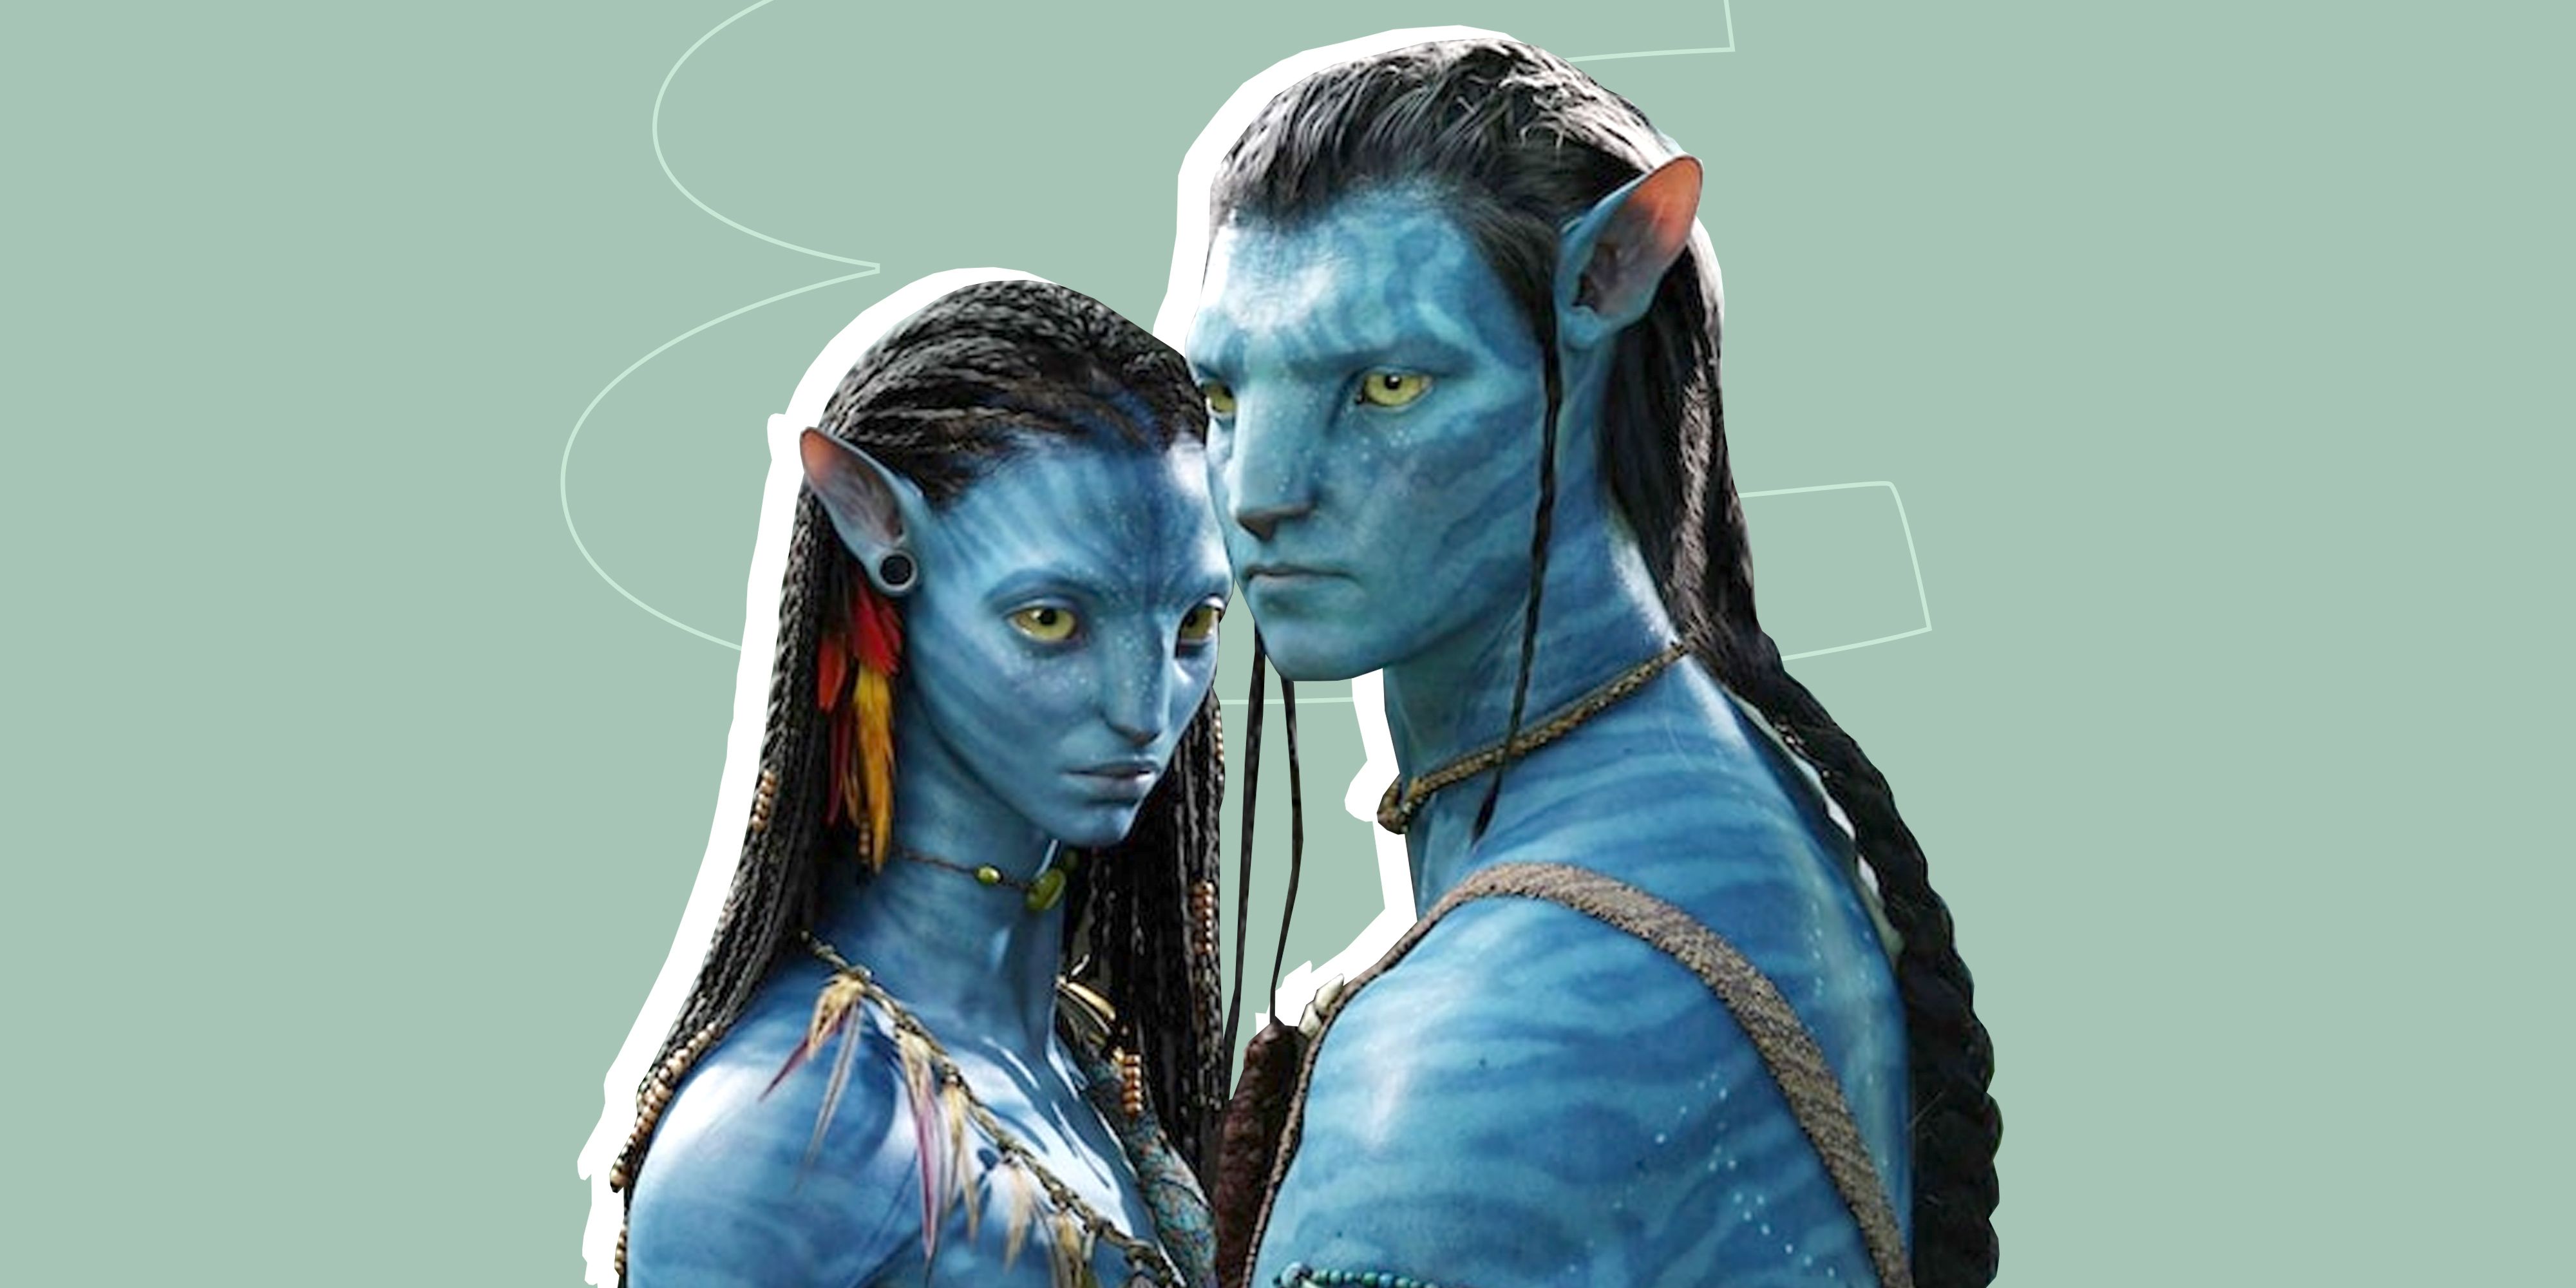 Avatar is back in cinemas but will audiences have Pandora withdrawal  again